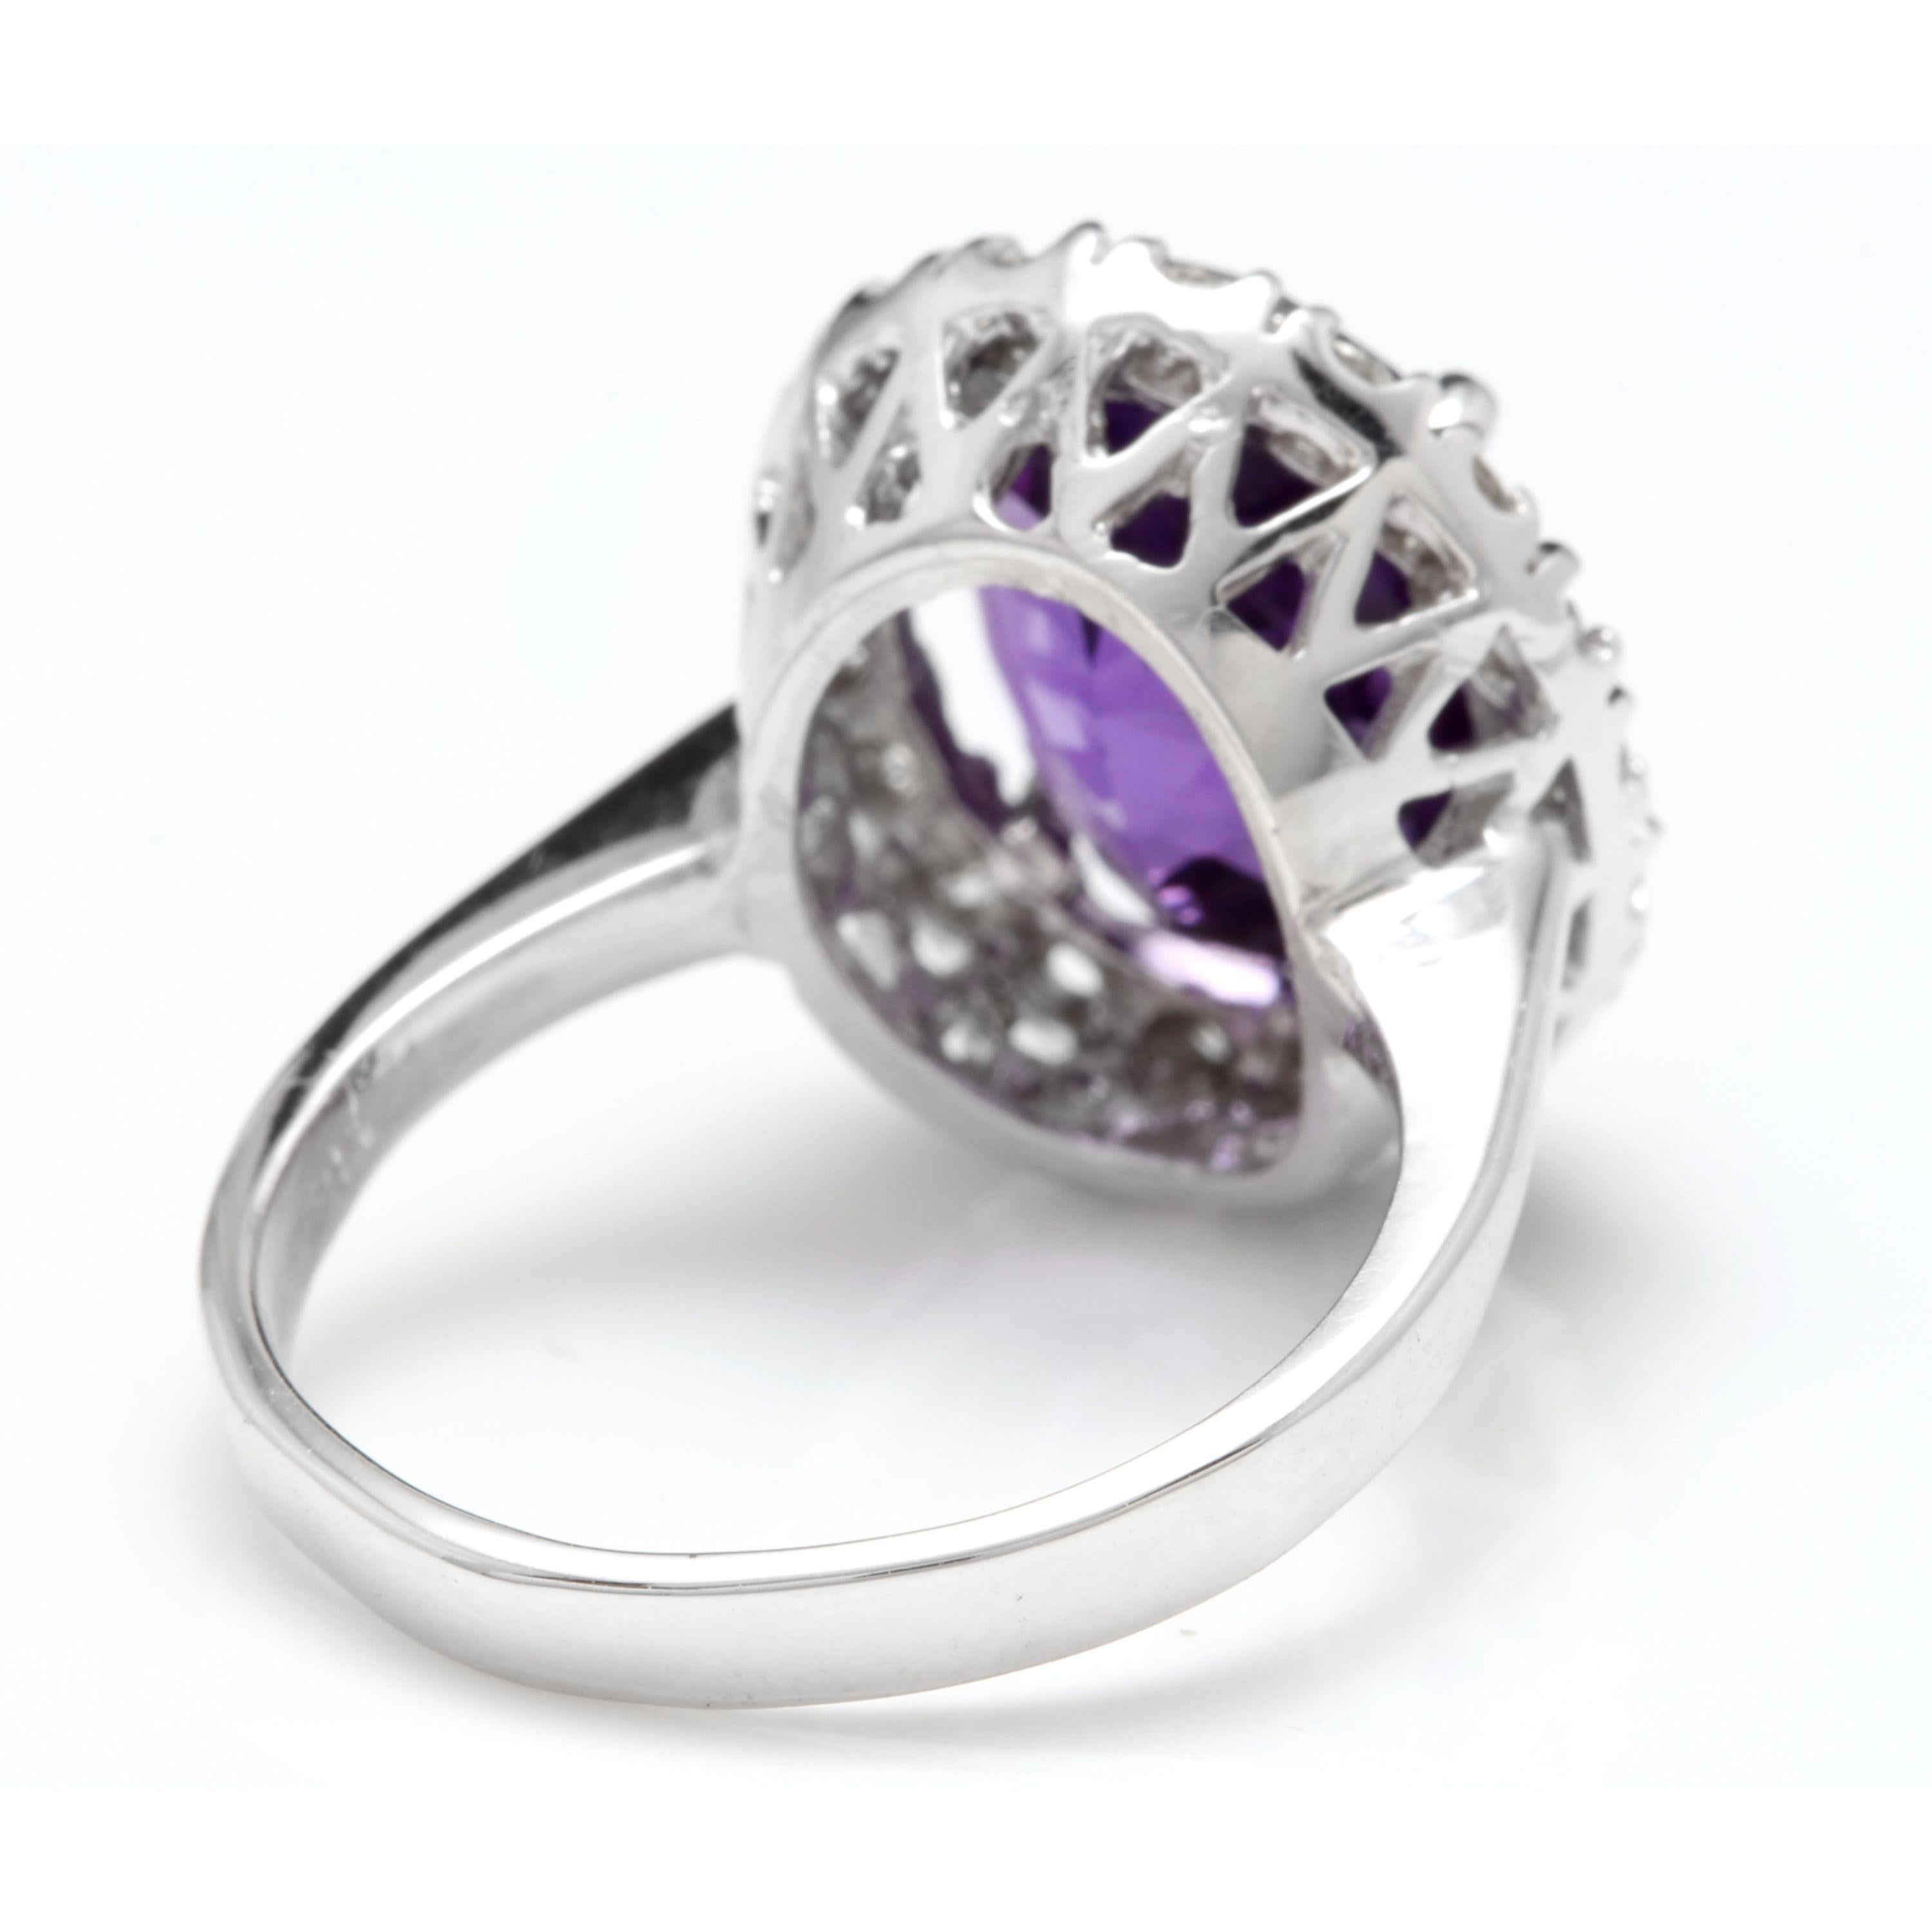 Mixed Cut 6.25 Carat Natural Amethyst and Diamond 14 Karat Solid White Gold Ring For Sale